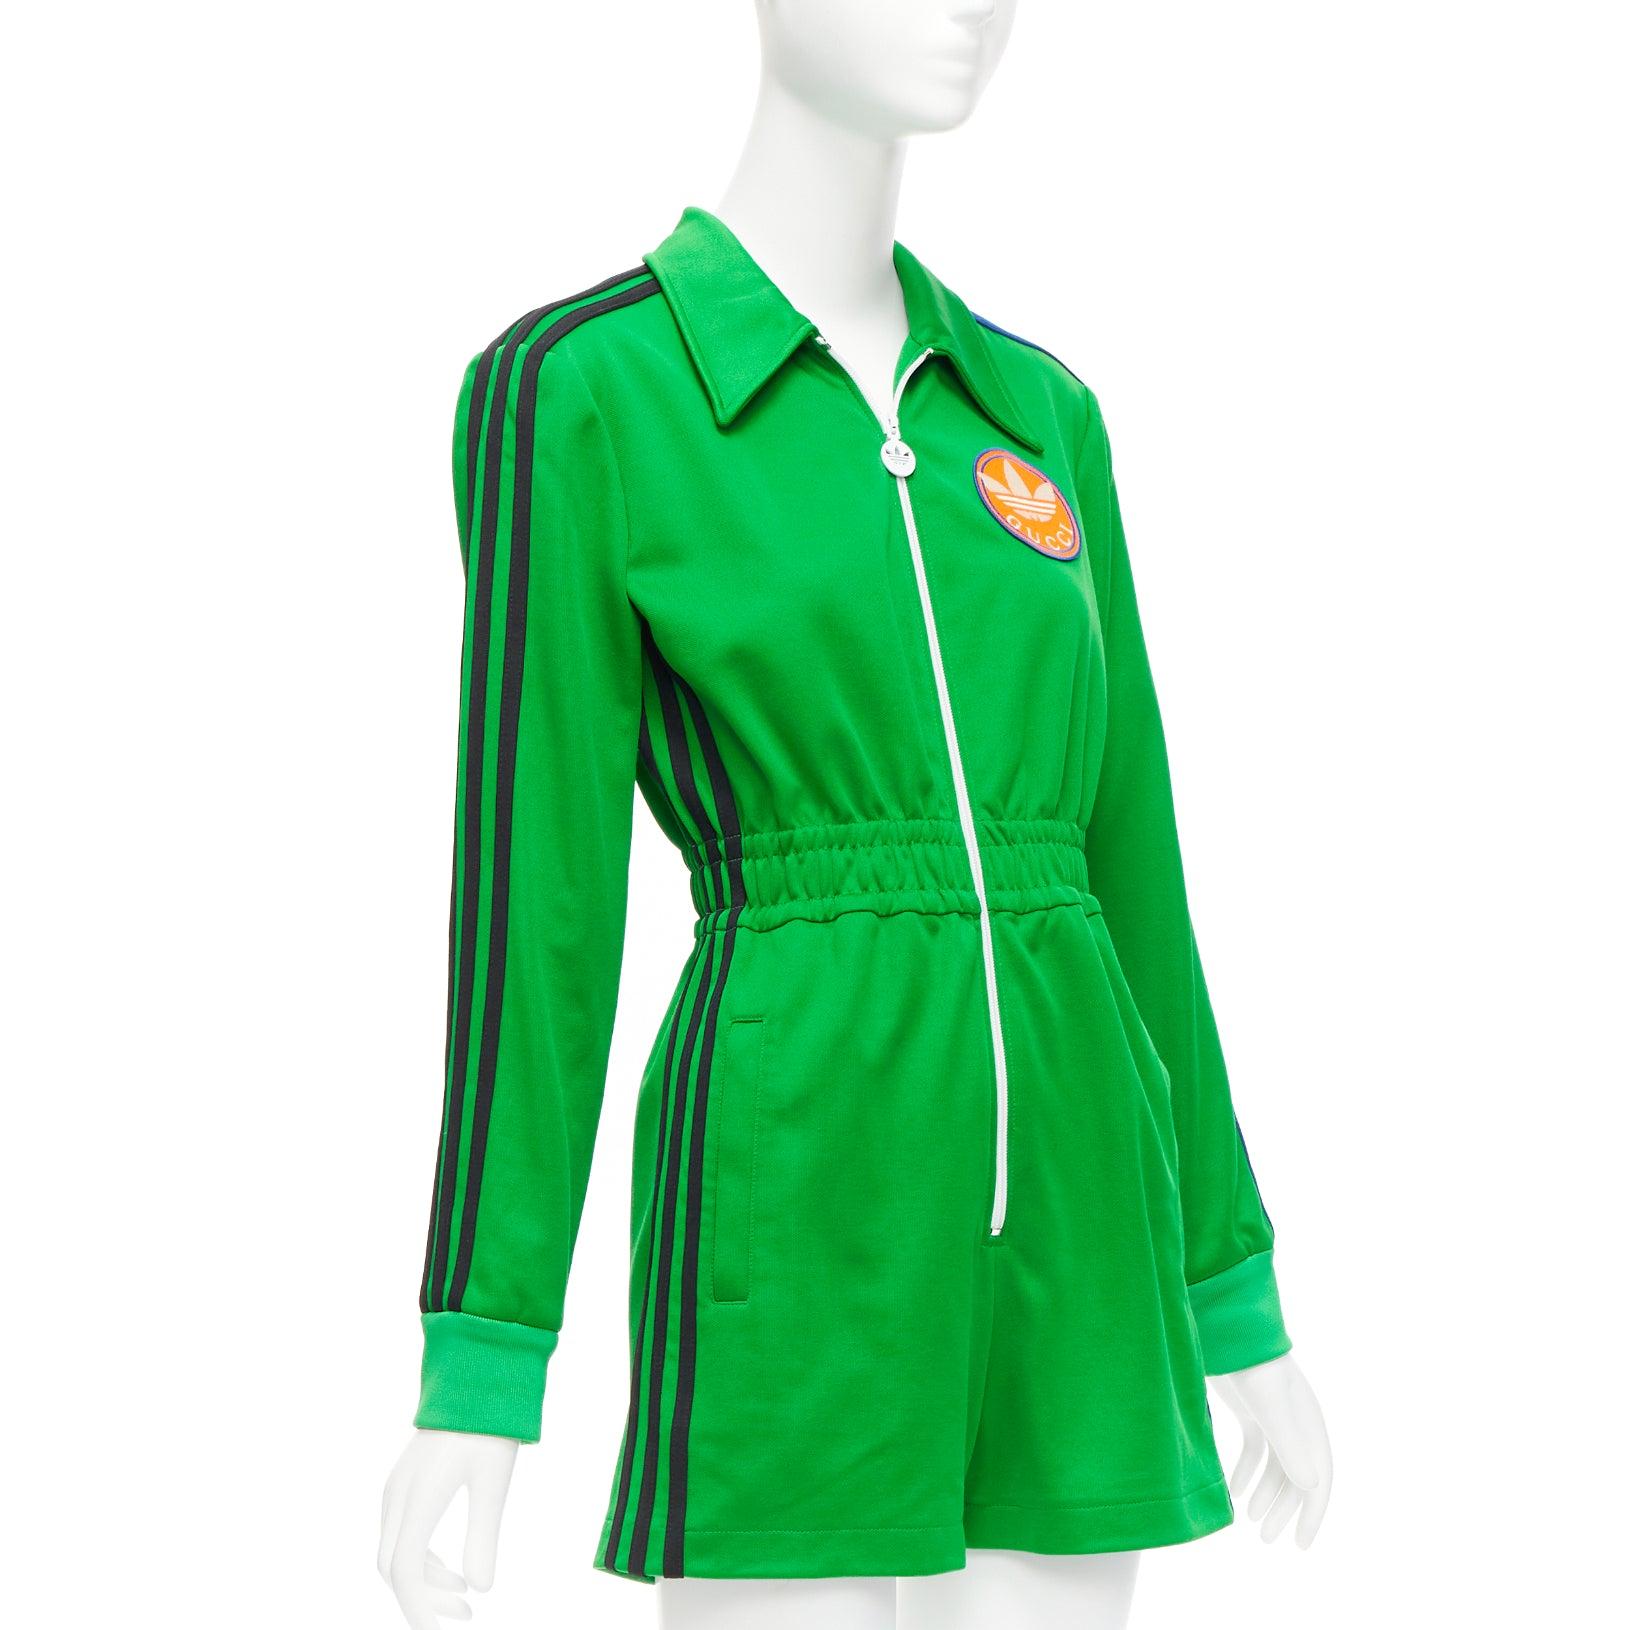 GUCCI Adidas 2022 green orange logo pique stripes long sleeve zip romper XS
Reference: AAWC/A00691
Brand: Gucci
Designer: Alessandro Michele
Model: 697274 XJEAZ 3778
Collection: 2022 Adidas
Material: Polyester, Blend
Color: Green,